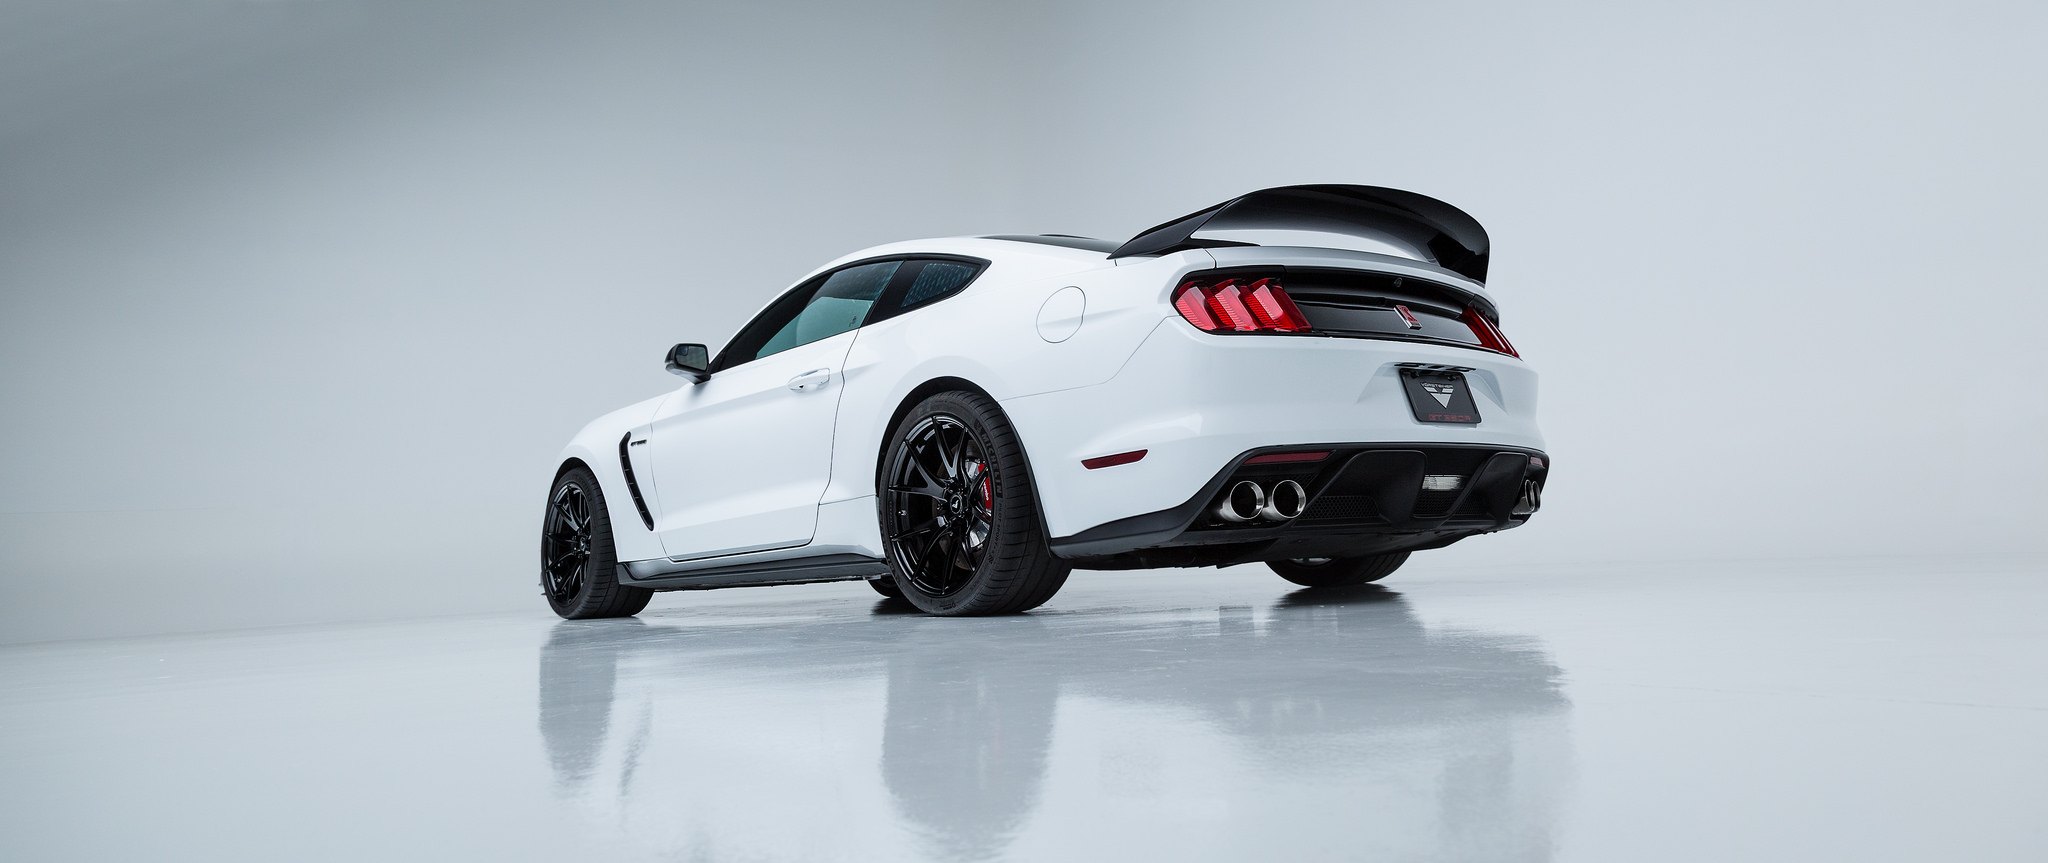 Aftermarket Rear Spoiler on White Ford Mustang GT350 - Photo by Vorsteiner